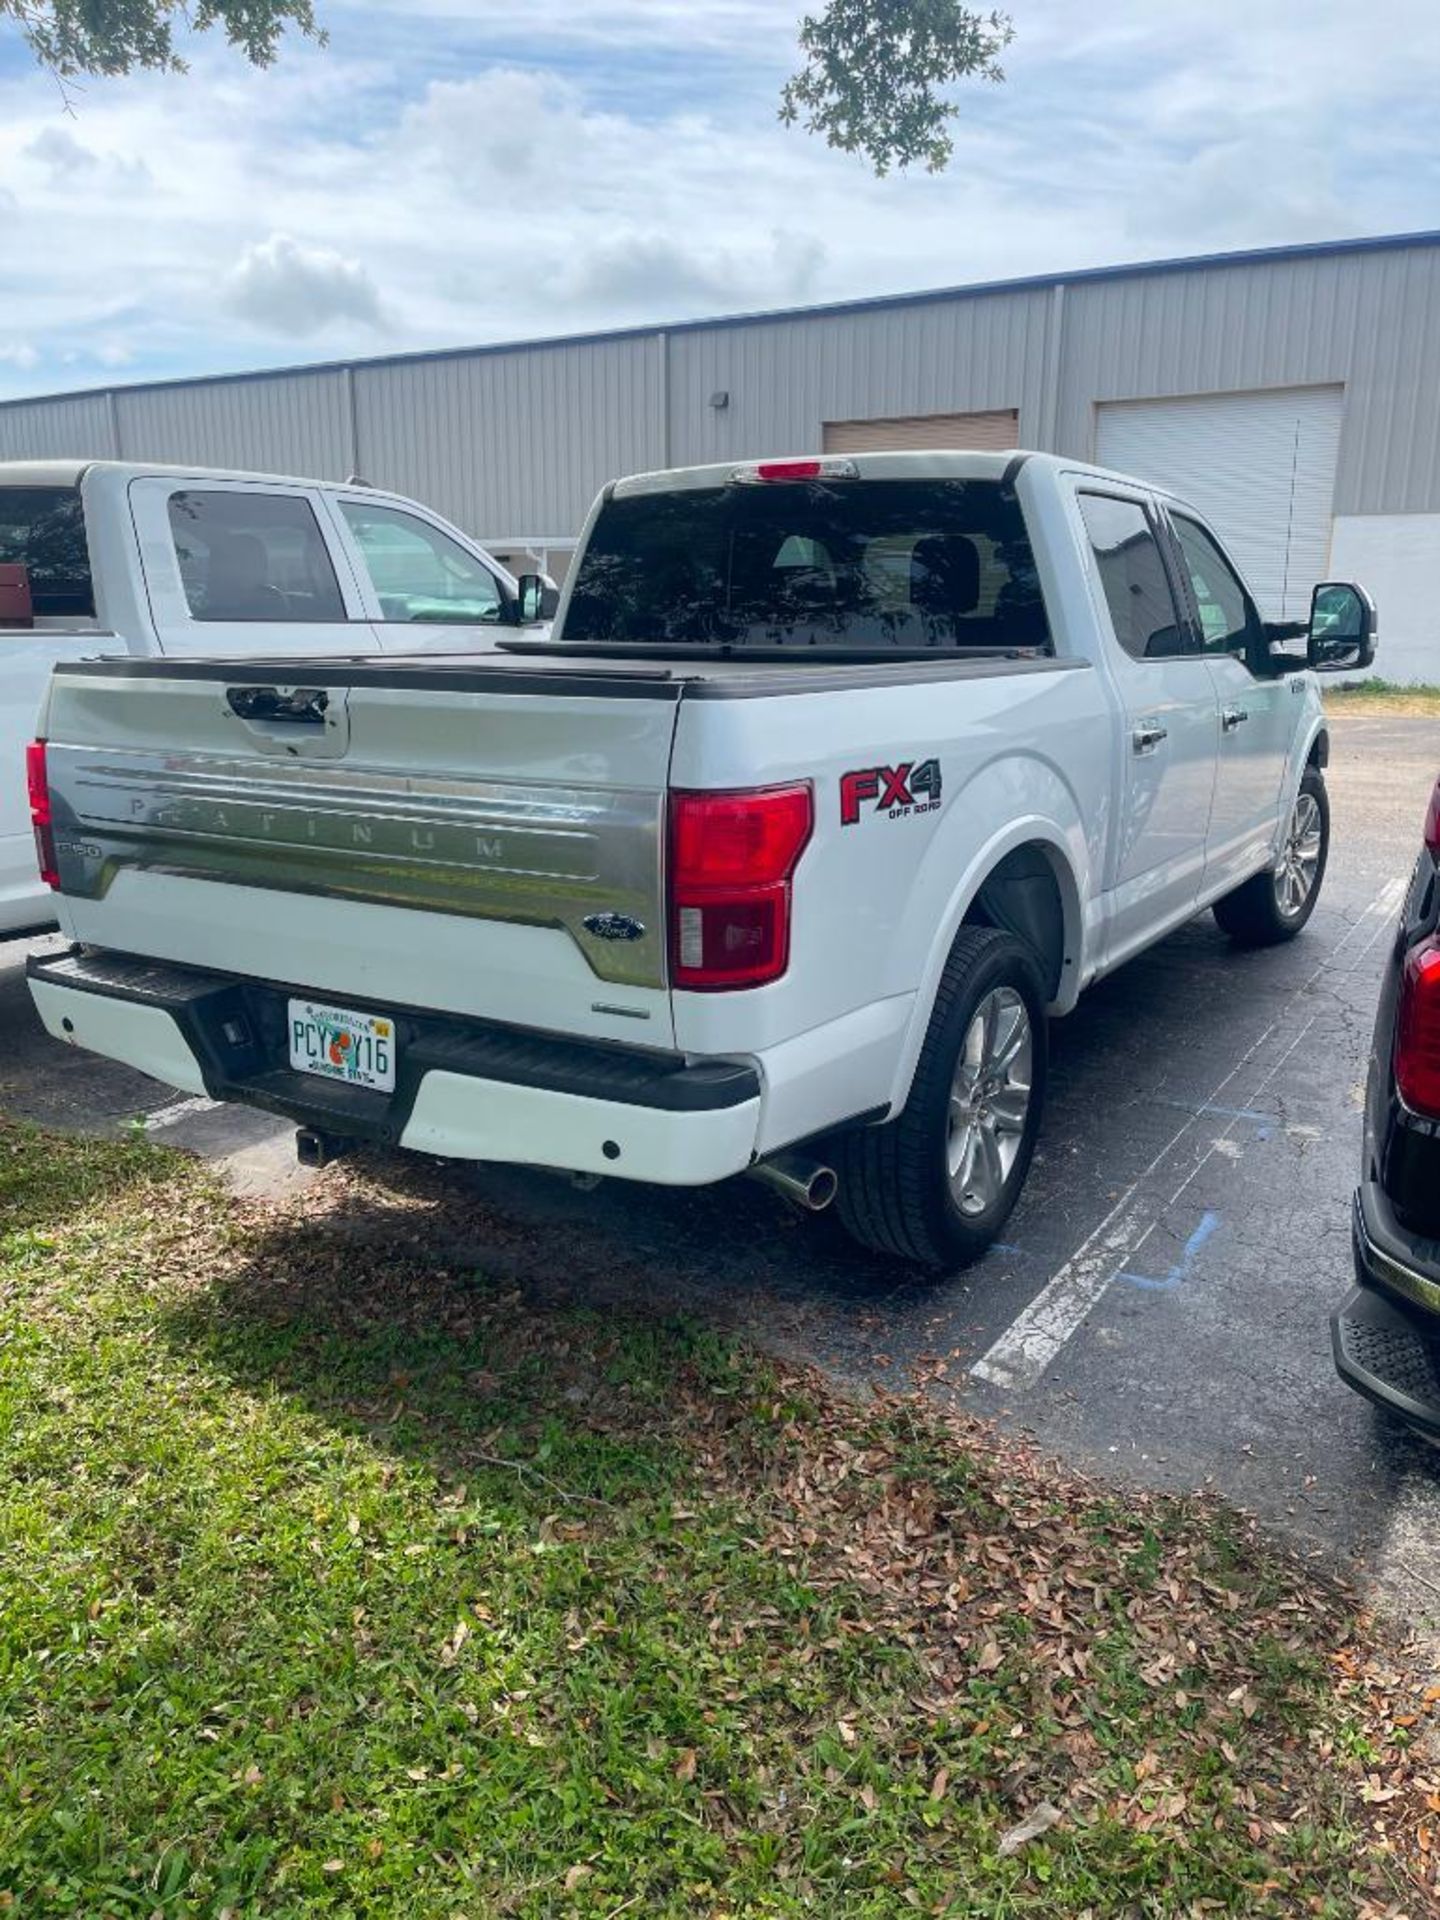 2020 Ford F-150 Plat 4WD Super Crew V6 Turbo, Gas, License# PCY-Y16, VIN 1FTEW1E42LFB28361, 77,200 M - Image 3 of 15